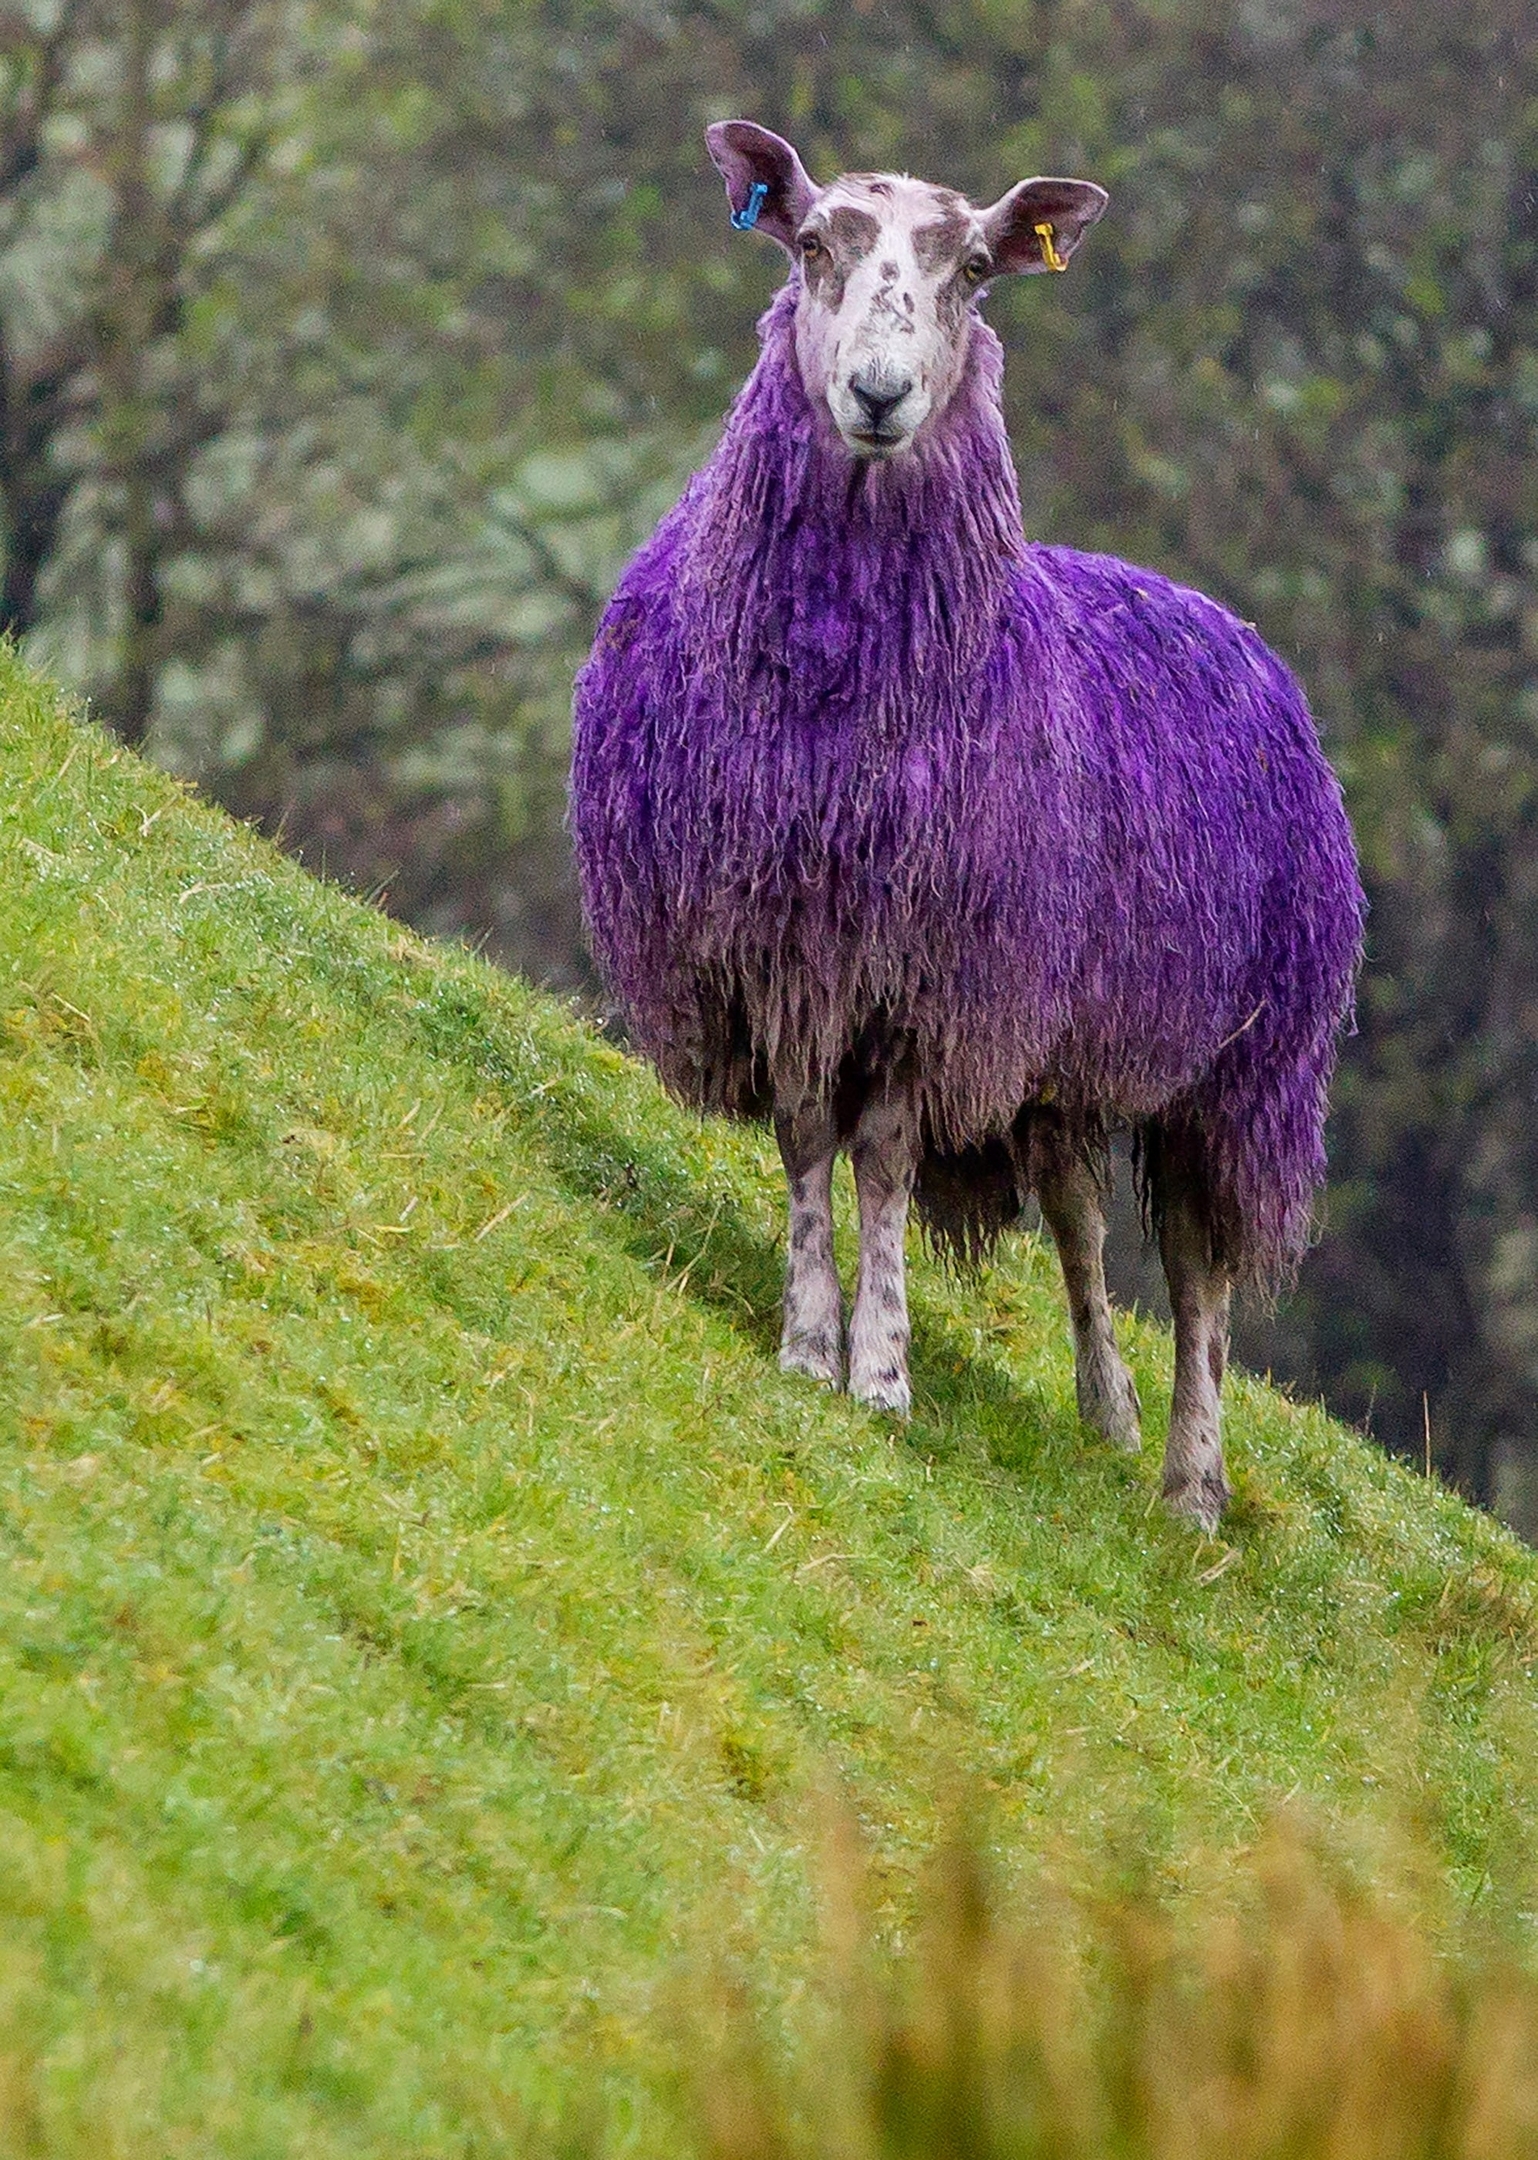 Why have these Scottish sheep been turned purple? Press